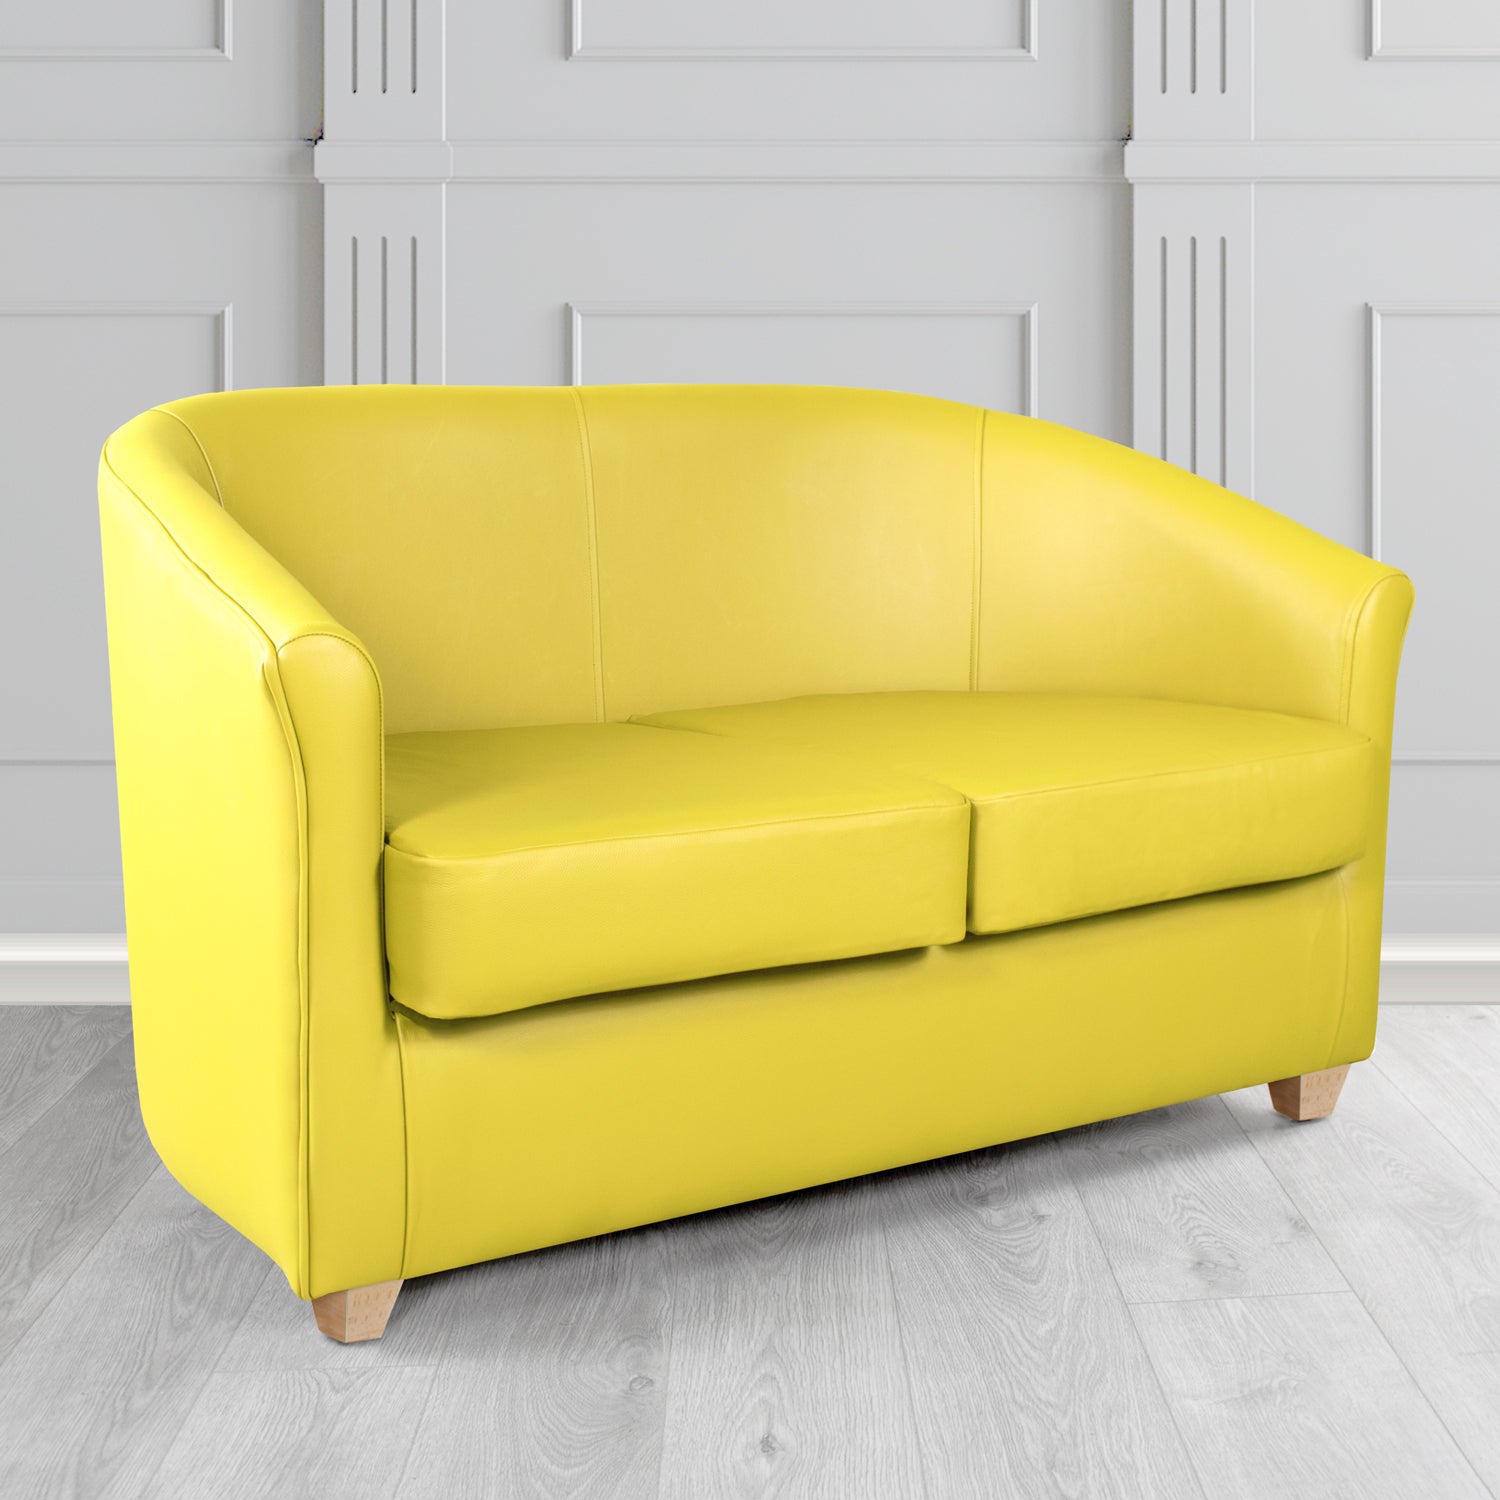 Cannes 2 Seater Tub Sofa in Just Colour Lemon Crib 5 Faux Leather - The Tub Chair Shop